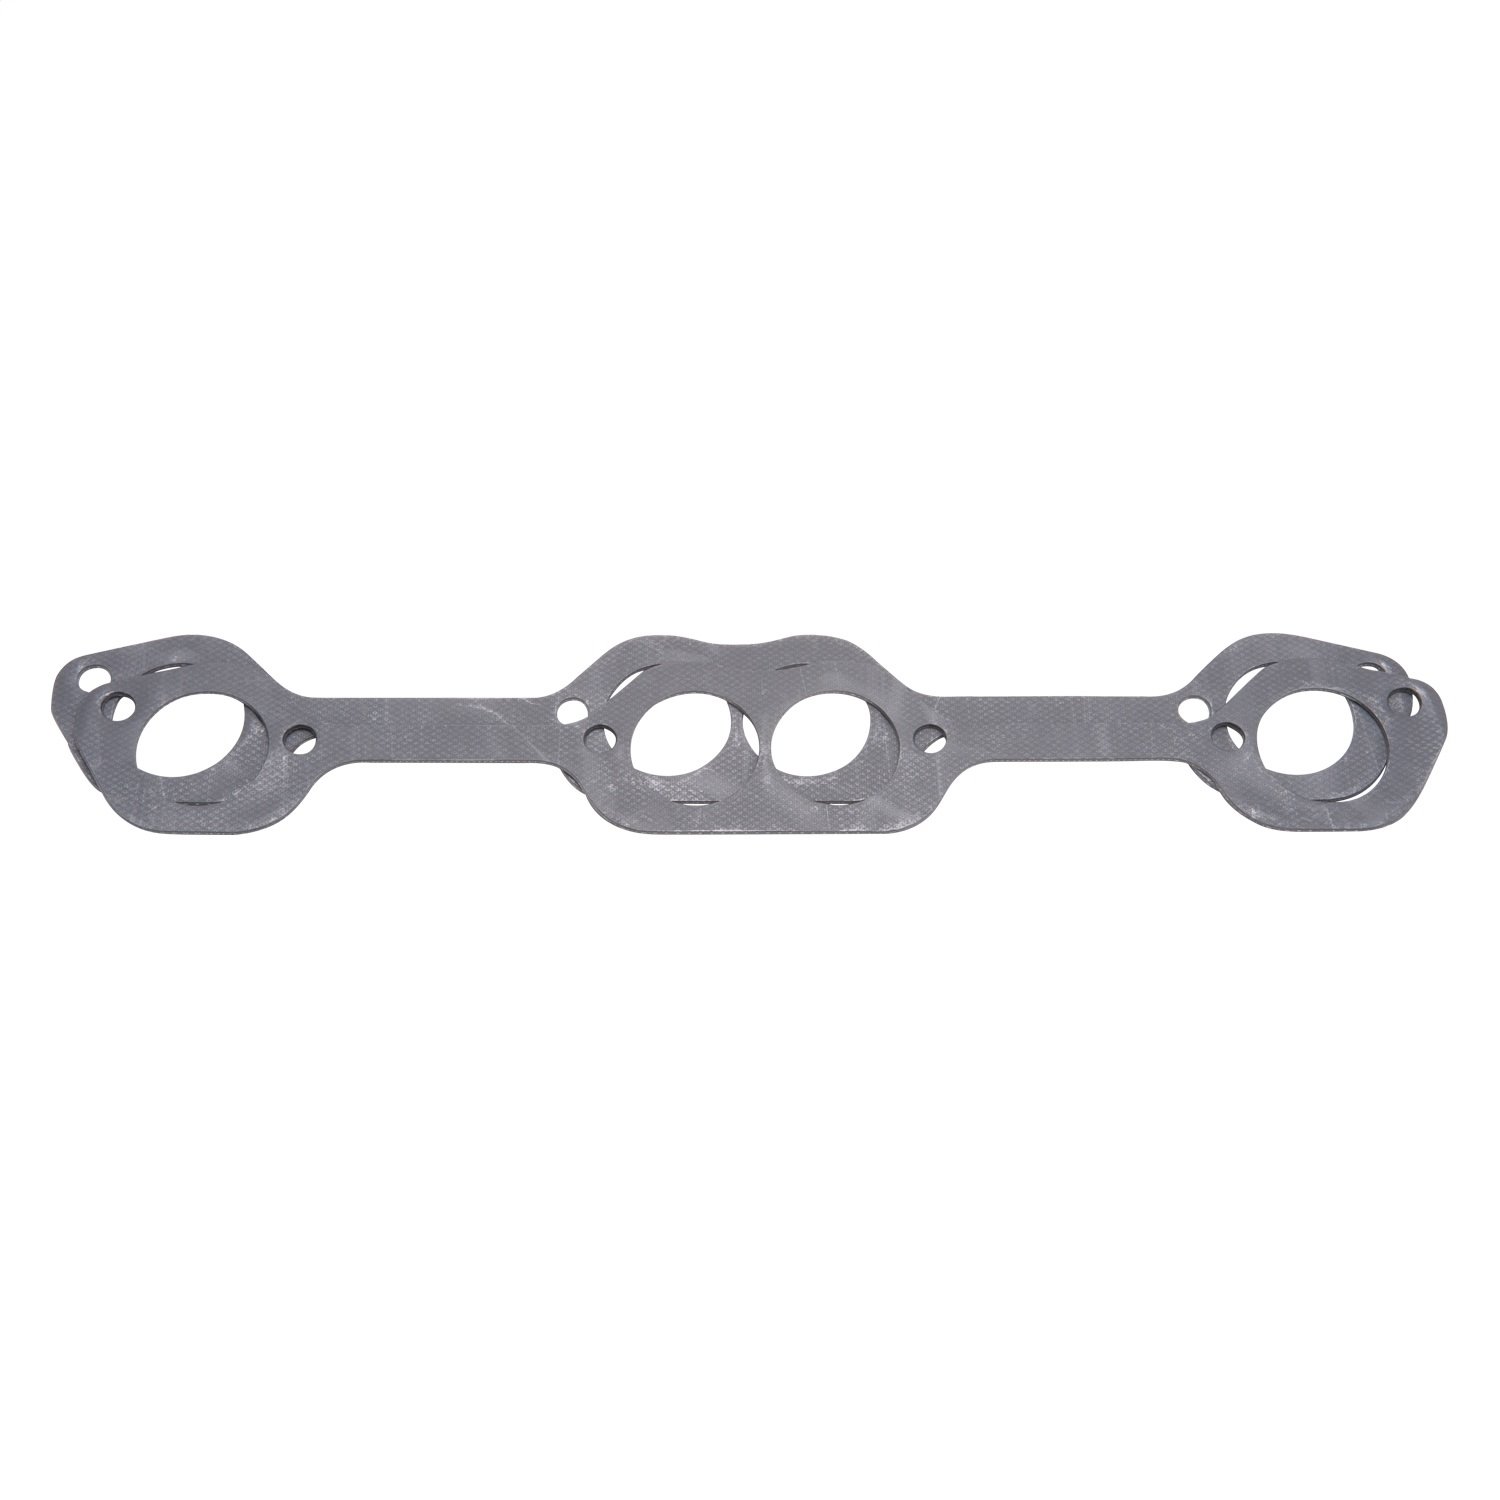 GASKET EXHAUST HEADER FOR 61709 CYL HEAD PAIR